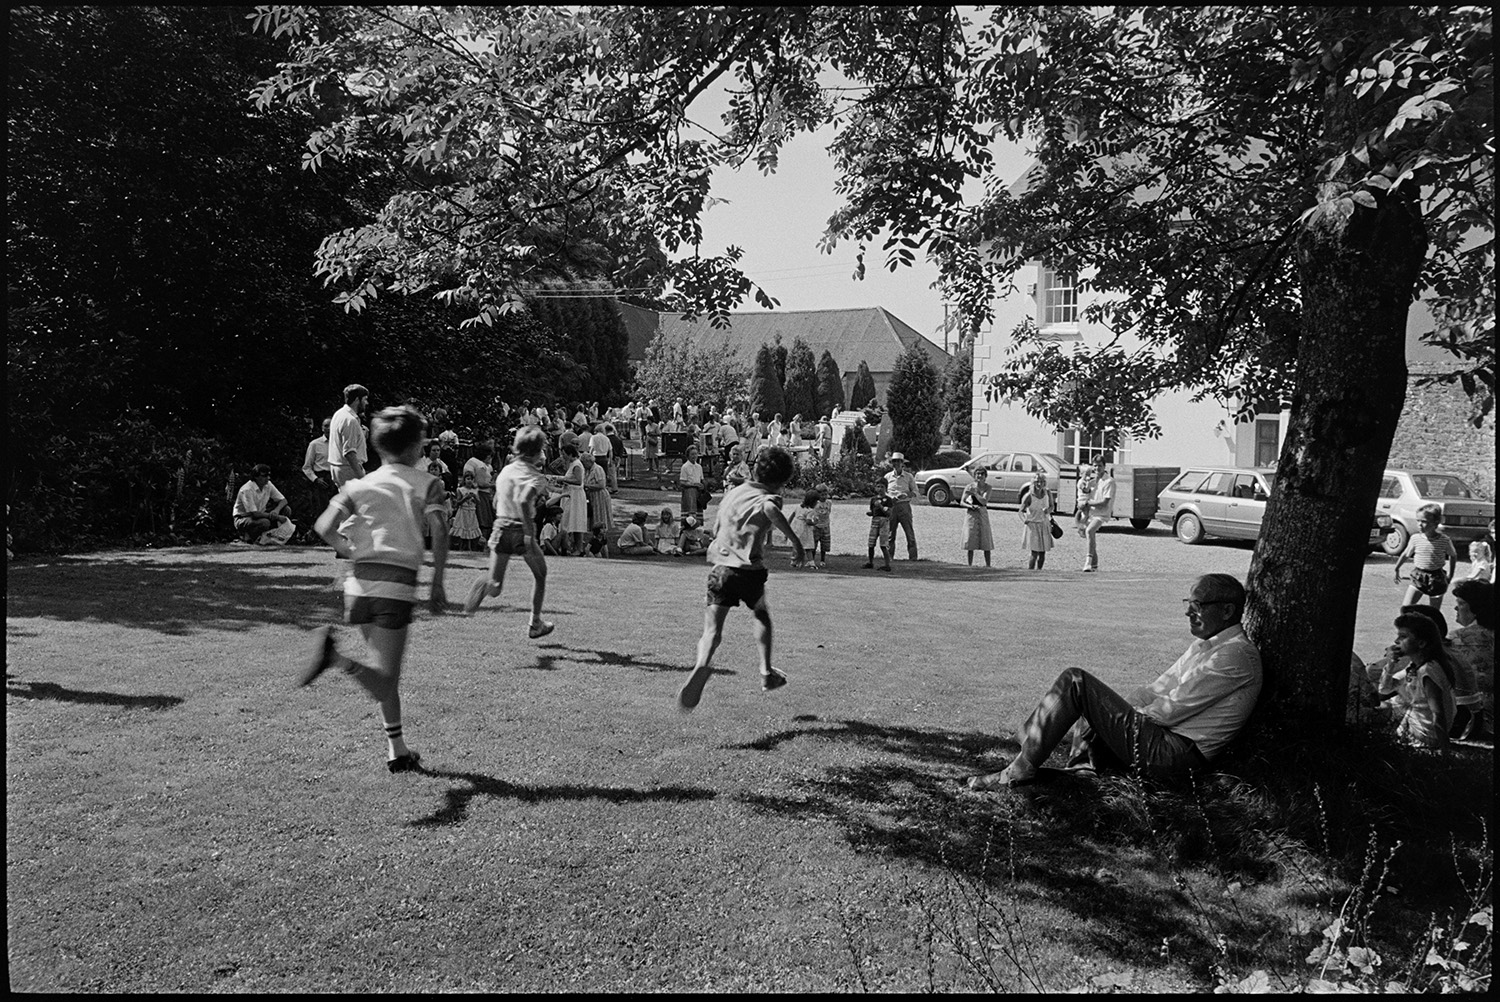 Vicarage garden fete, women spectators, games, dancing, man playing keyboard. Chatting!! 
[Children running in a race at Kings Nympton vicarage fete. A crowd of people are watching and a man is sat under a tree in the shade in the foreground.]